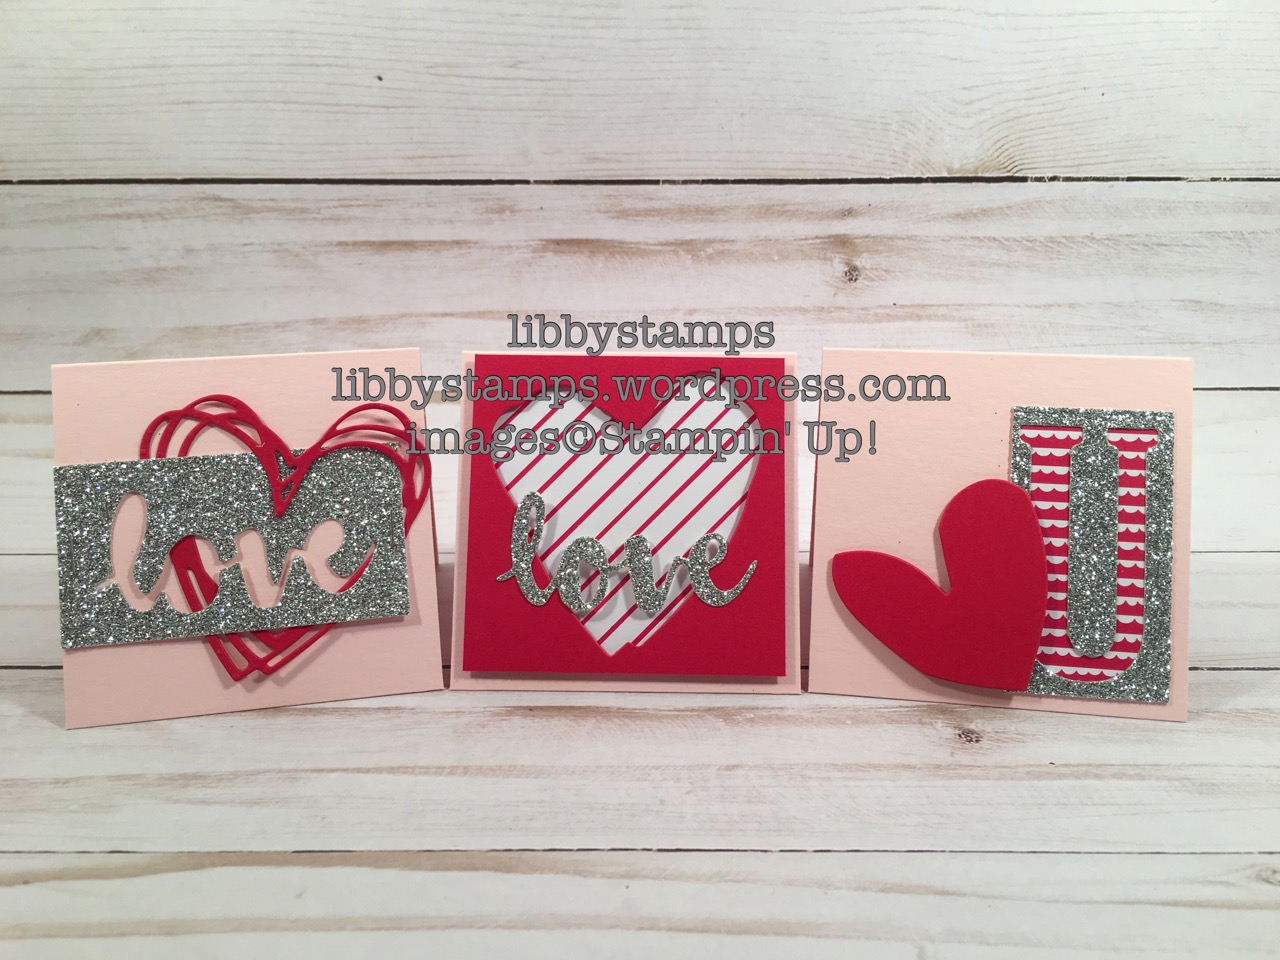 libbystamps, stampin up, Sunshine Wishes Thinlits, Large Letters Framelits, Silver Glimmer Paper, Sending Love DSP, BFBH, 3x3, love notes